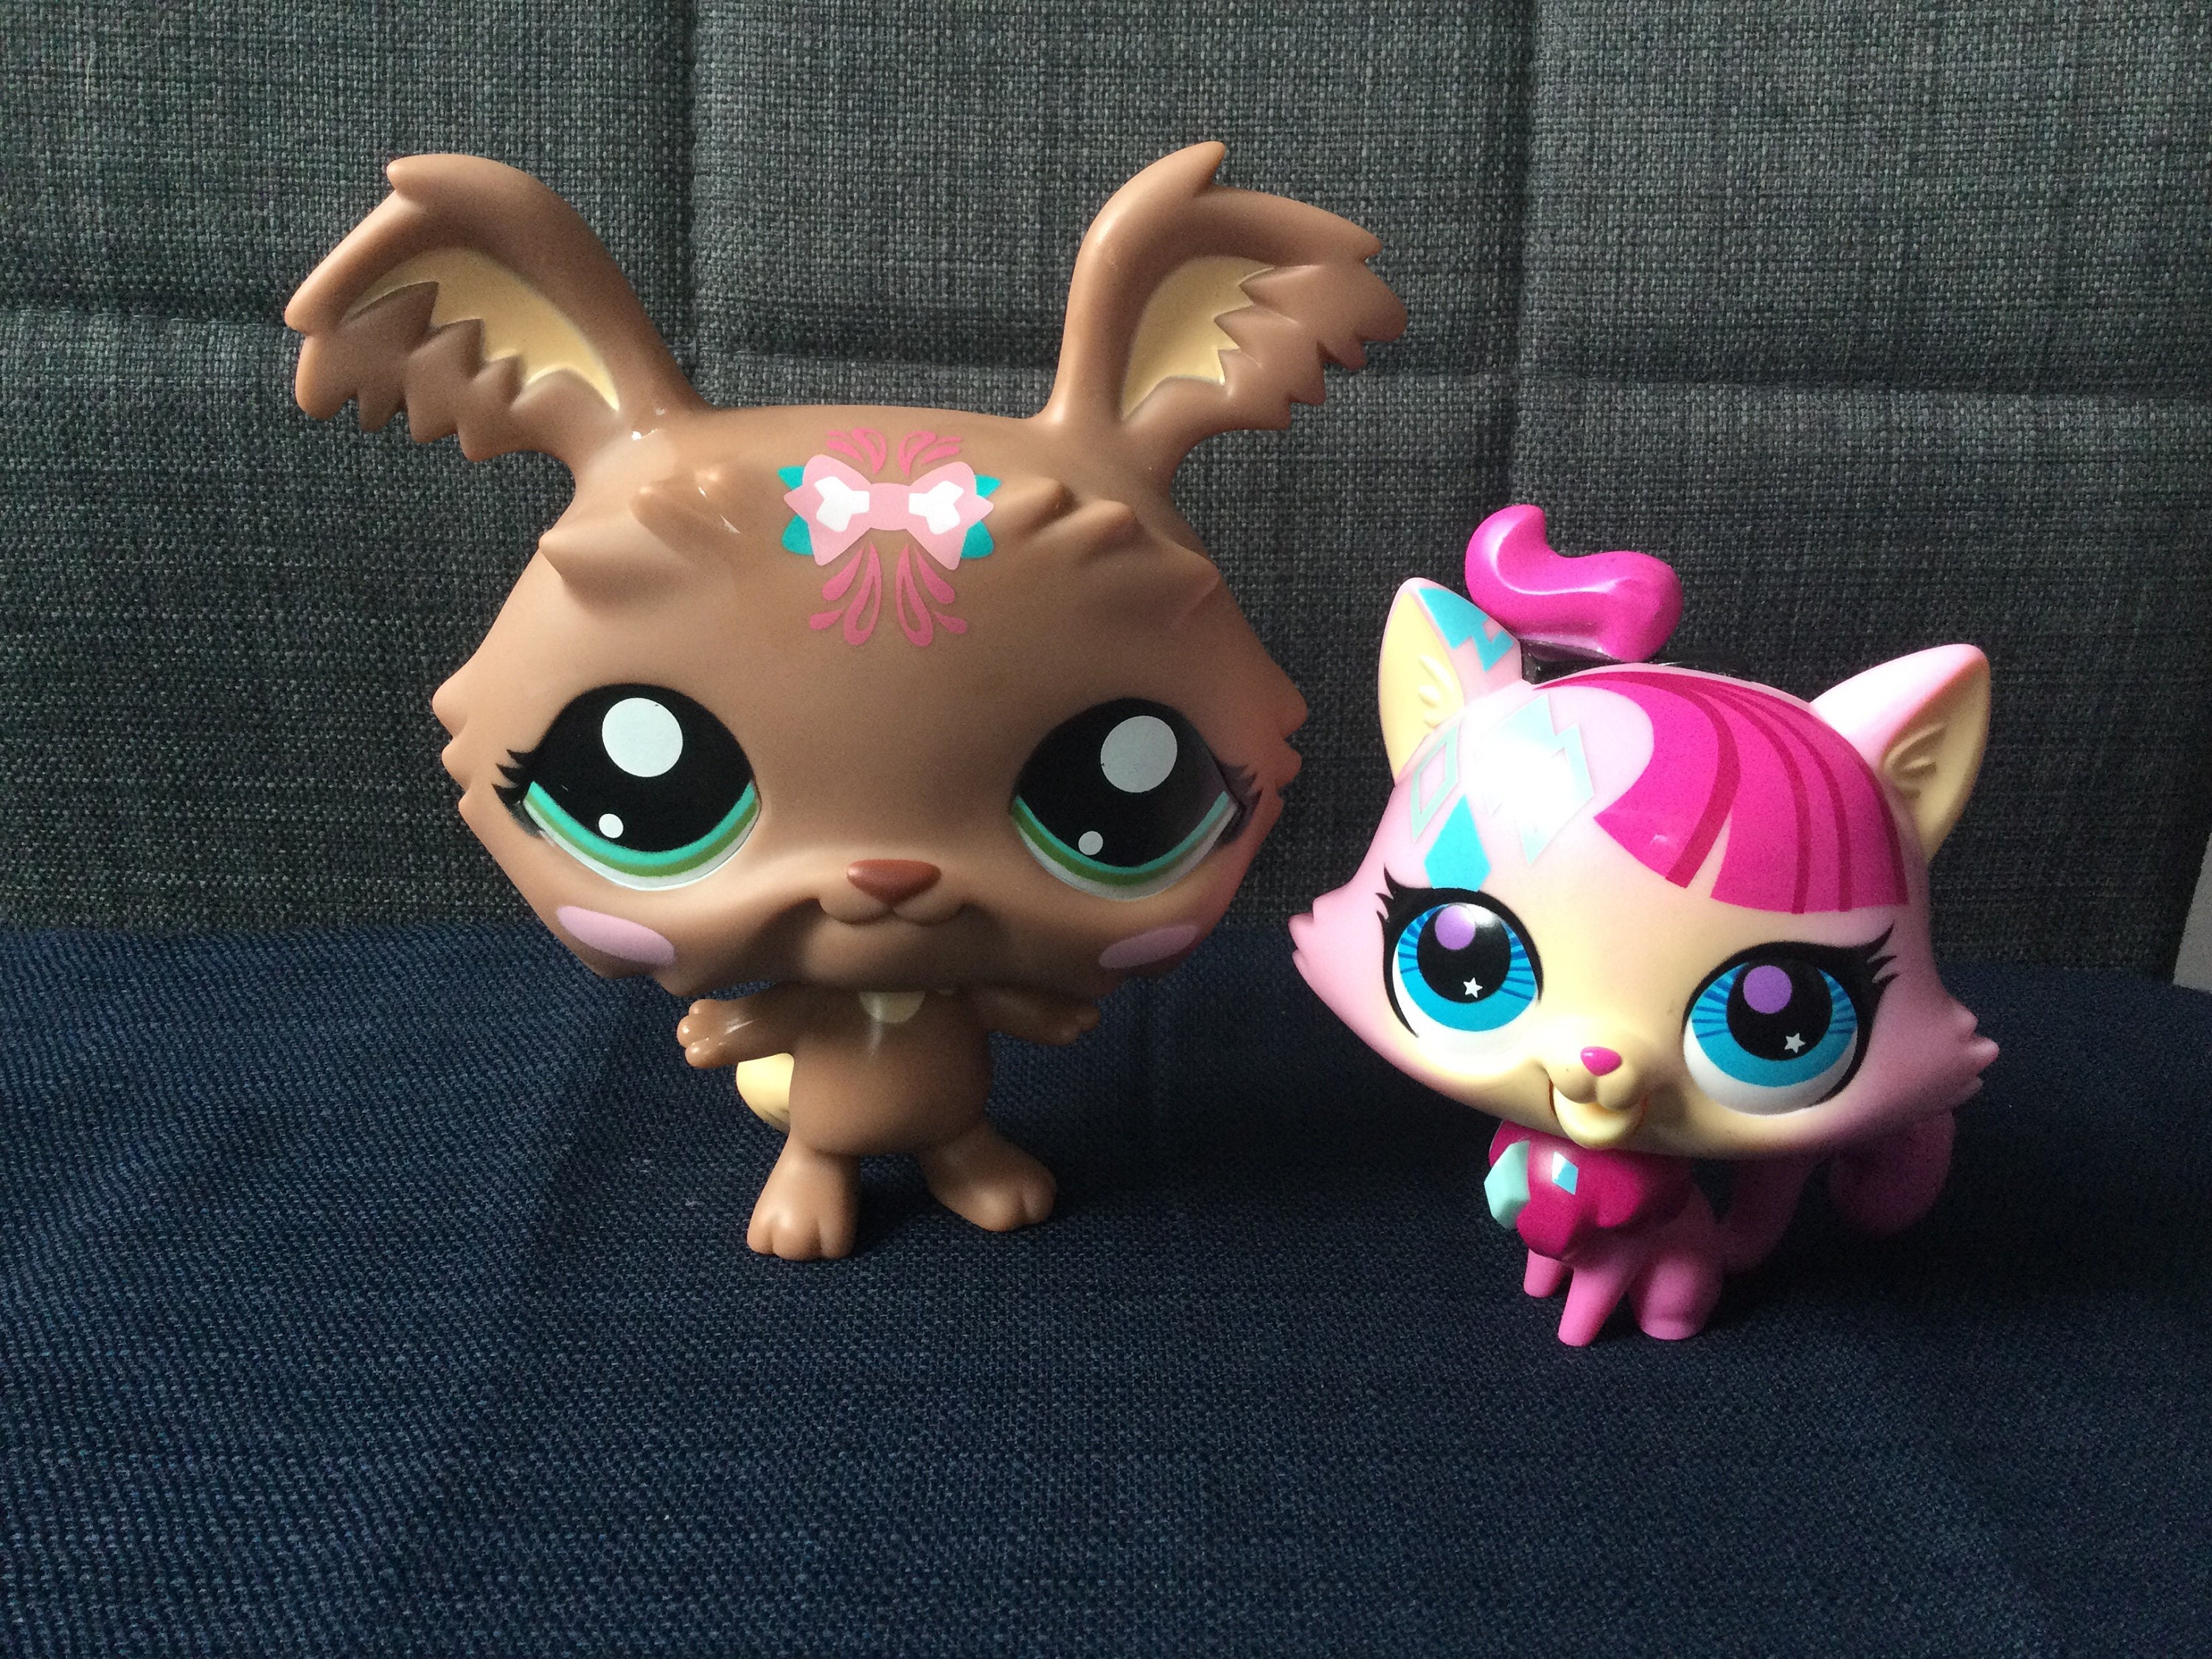 Old Littlest Pet Shop toys rare LPS dogs cute puppy toy for girls collection